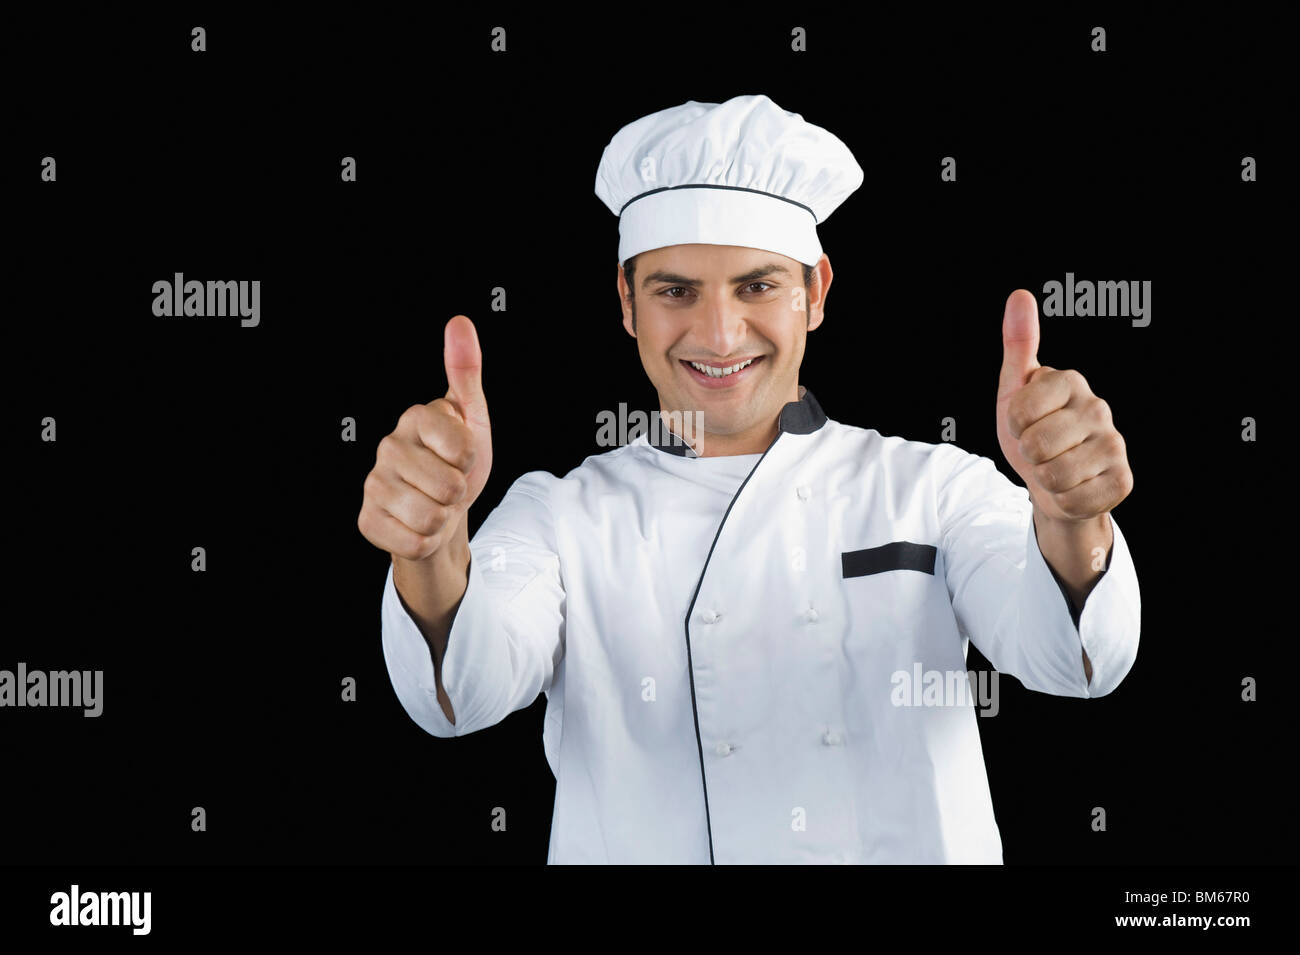 Portrait of a chef gesturing thumbs up sign Stock Photo